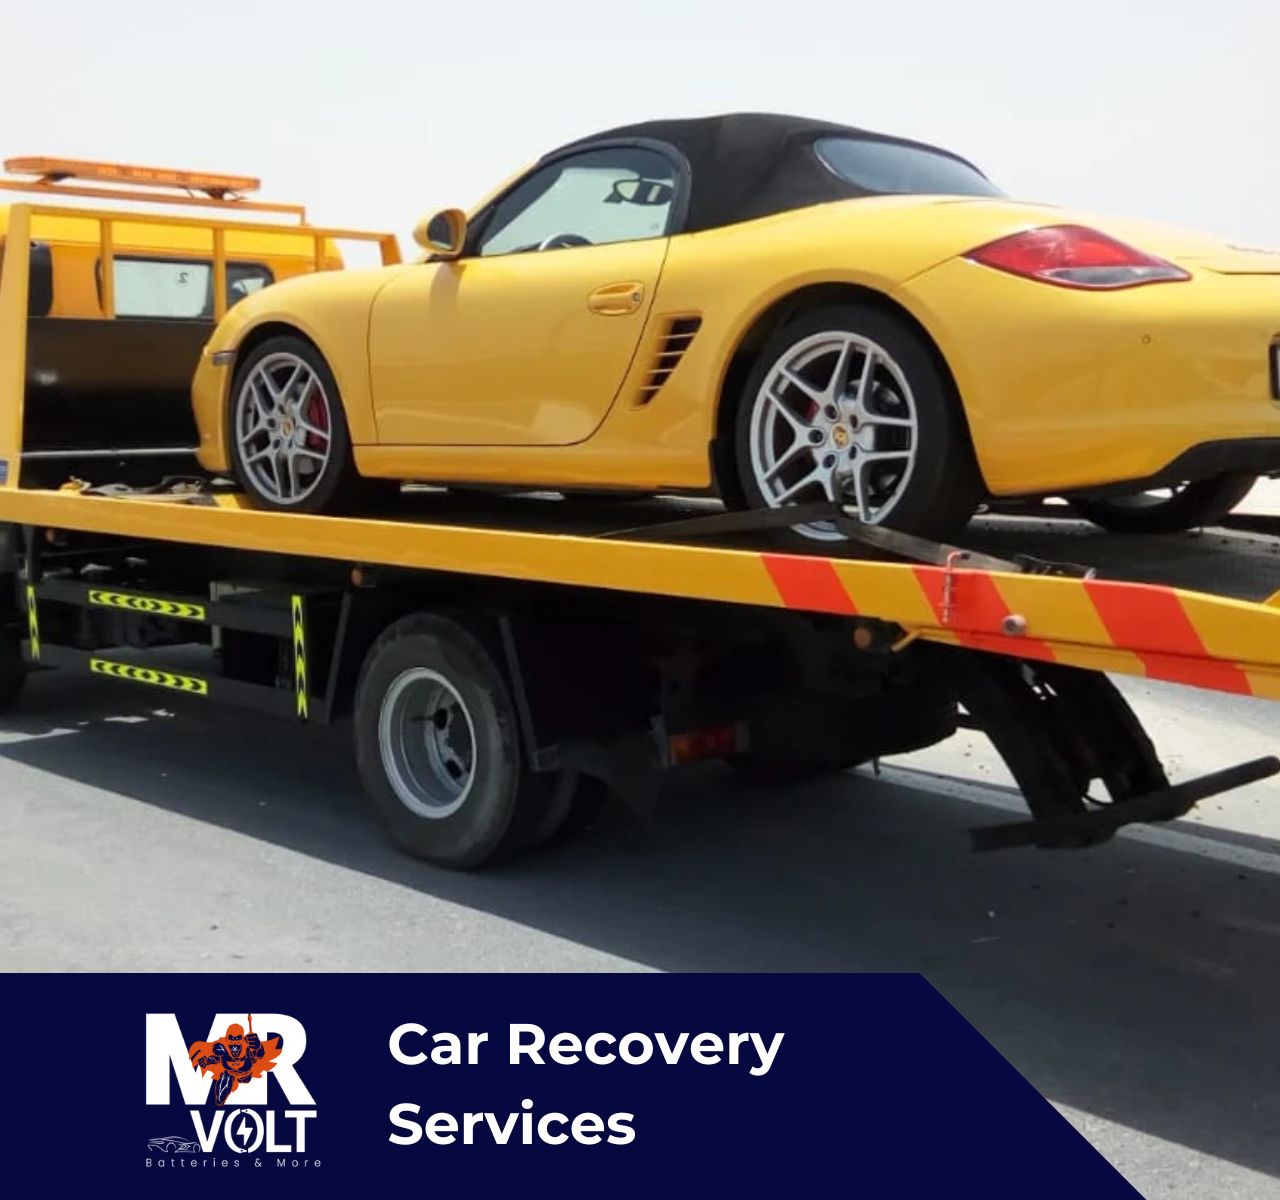 24/7 Car Recovery Services in Dubai